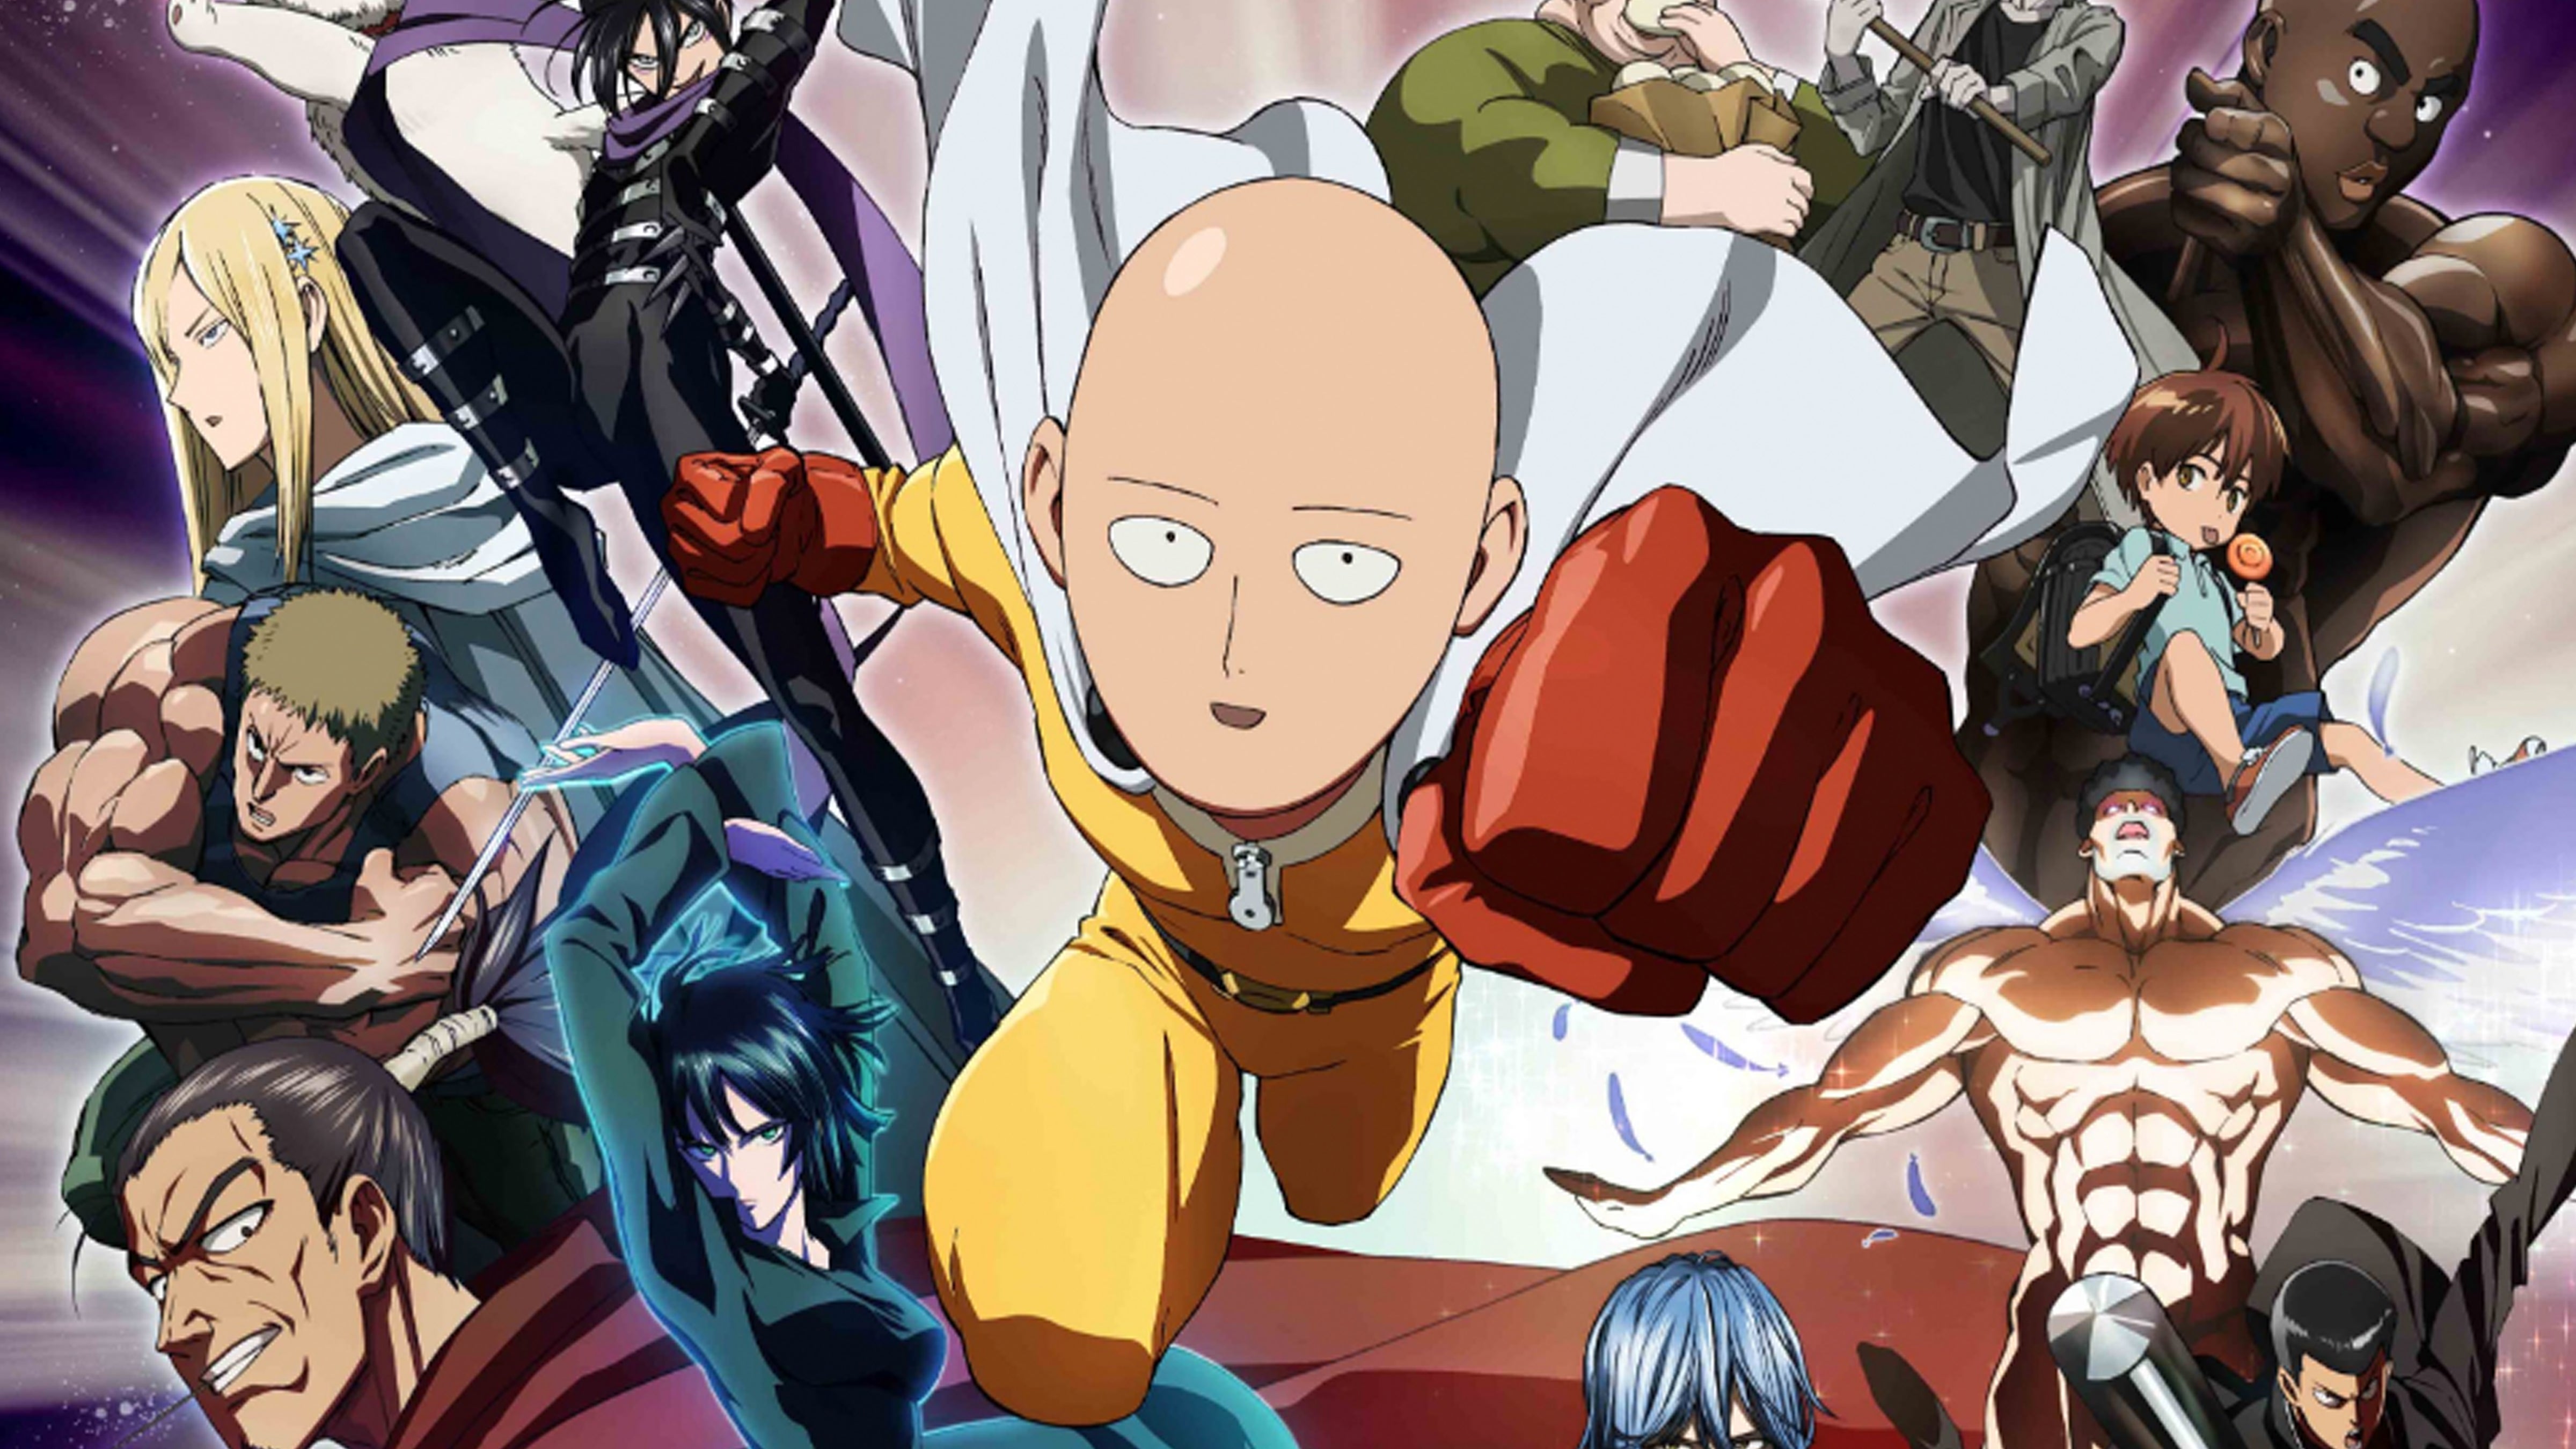 16 Quality One Punch Man Wallpapers, Anime & Manga Desktop Background